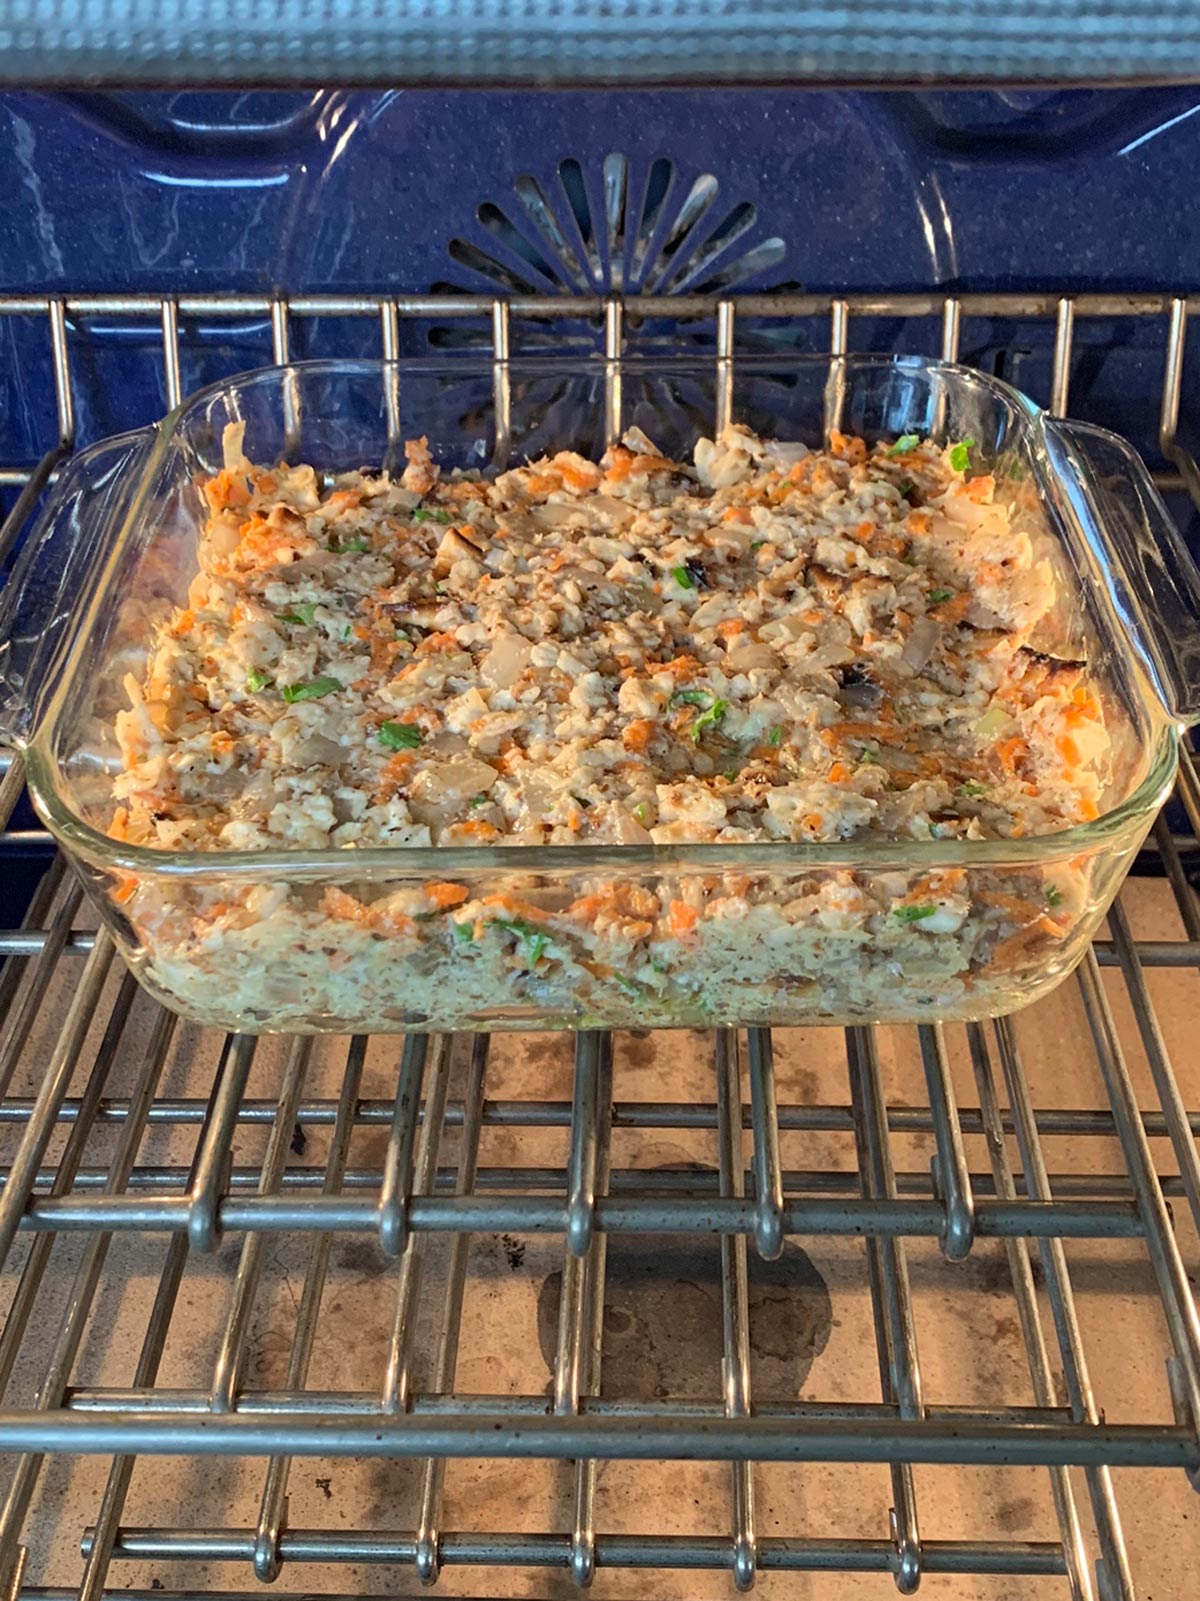 Matzo farfel kugel in a square baking pan in the oven ready to bake.